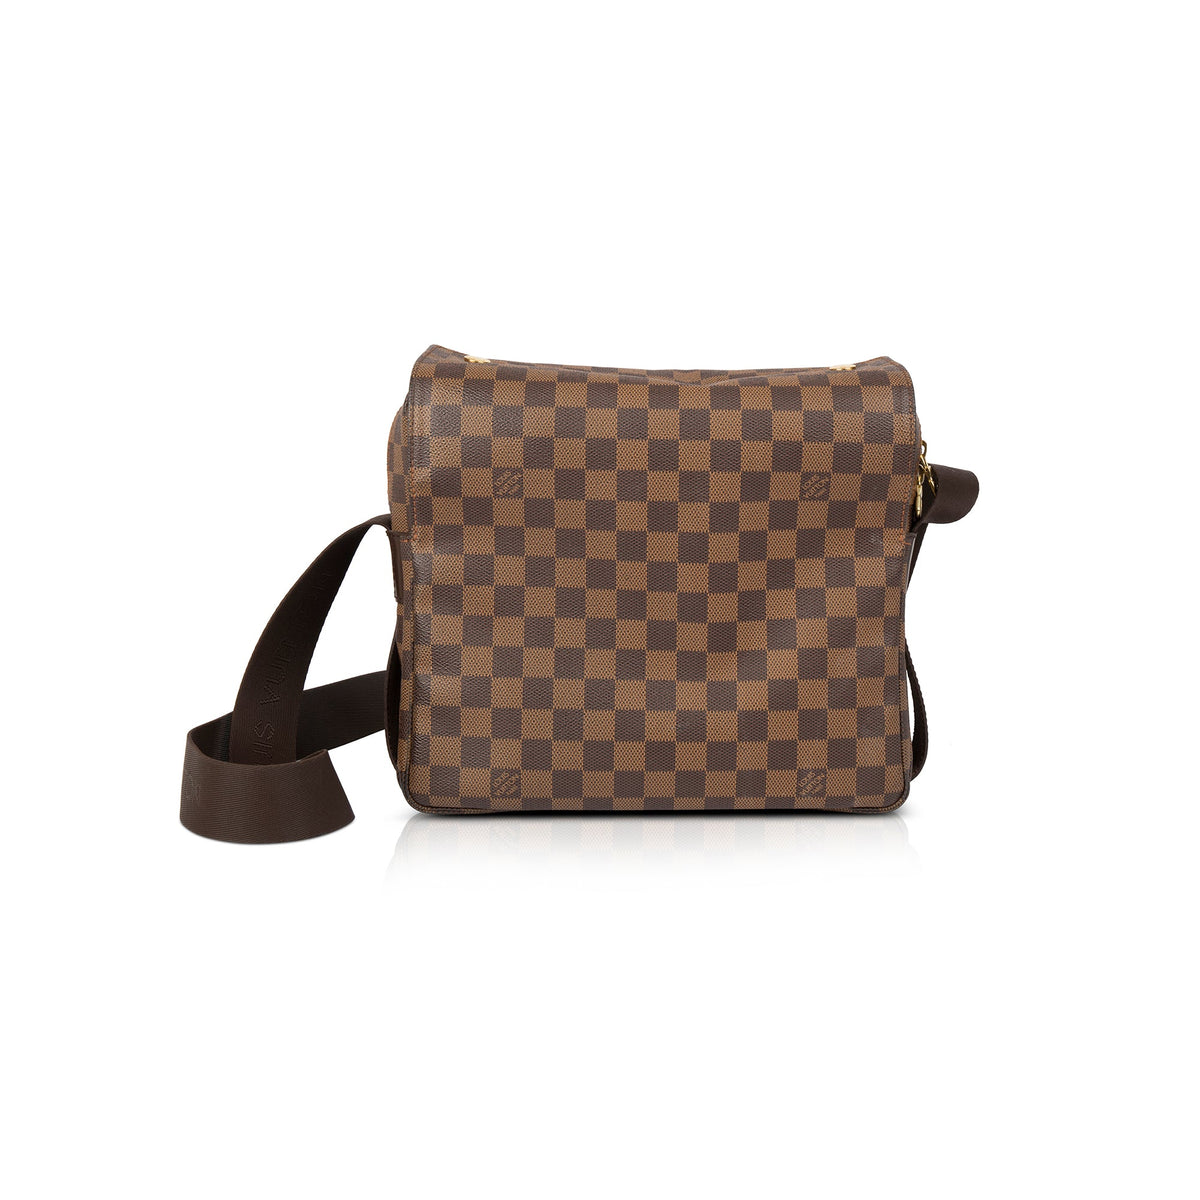 Save big on Louis Vuitton Damier Ebene Naviglio Messenger Bag Louis Vuitton  . Shop the best products at great prices and excellent service